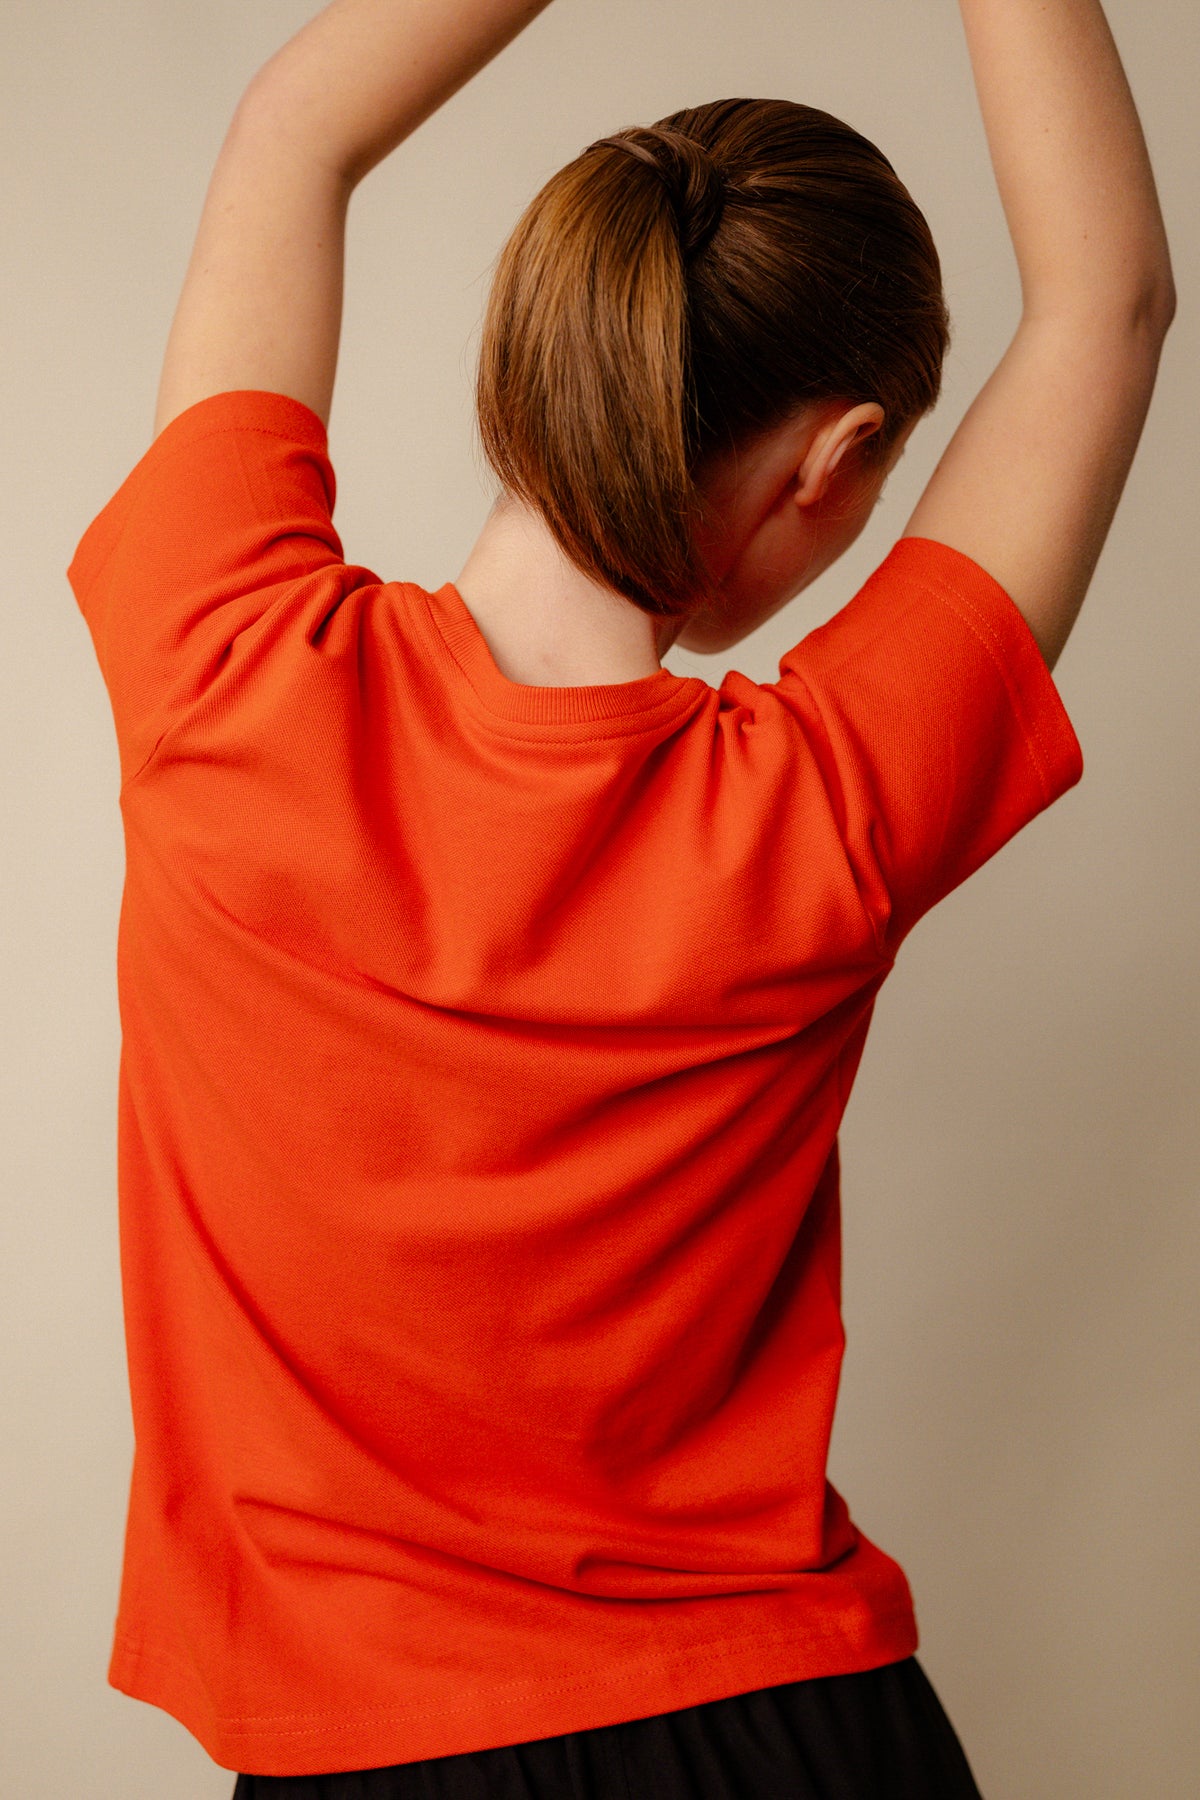 
            Back of female stretching arms up wearing breathable t shirt in flame red